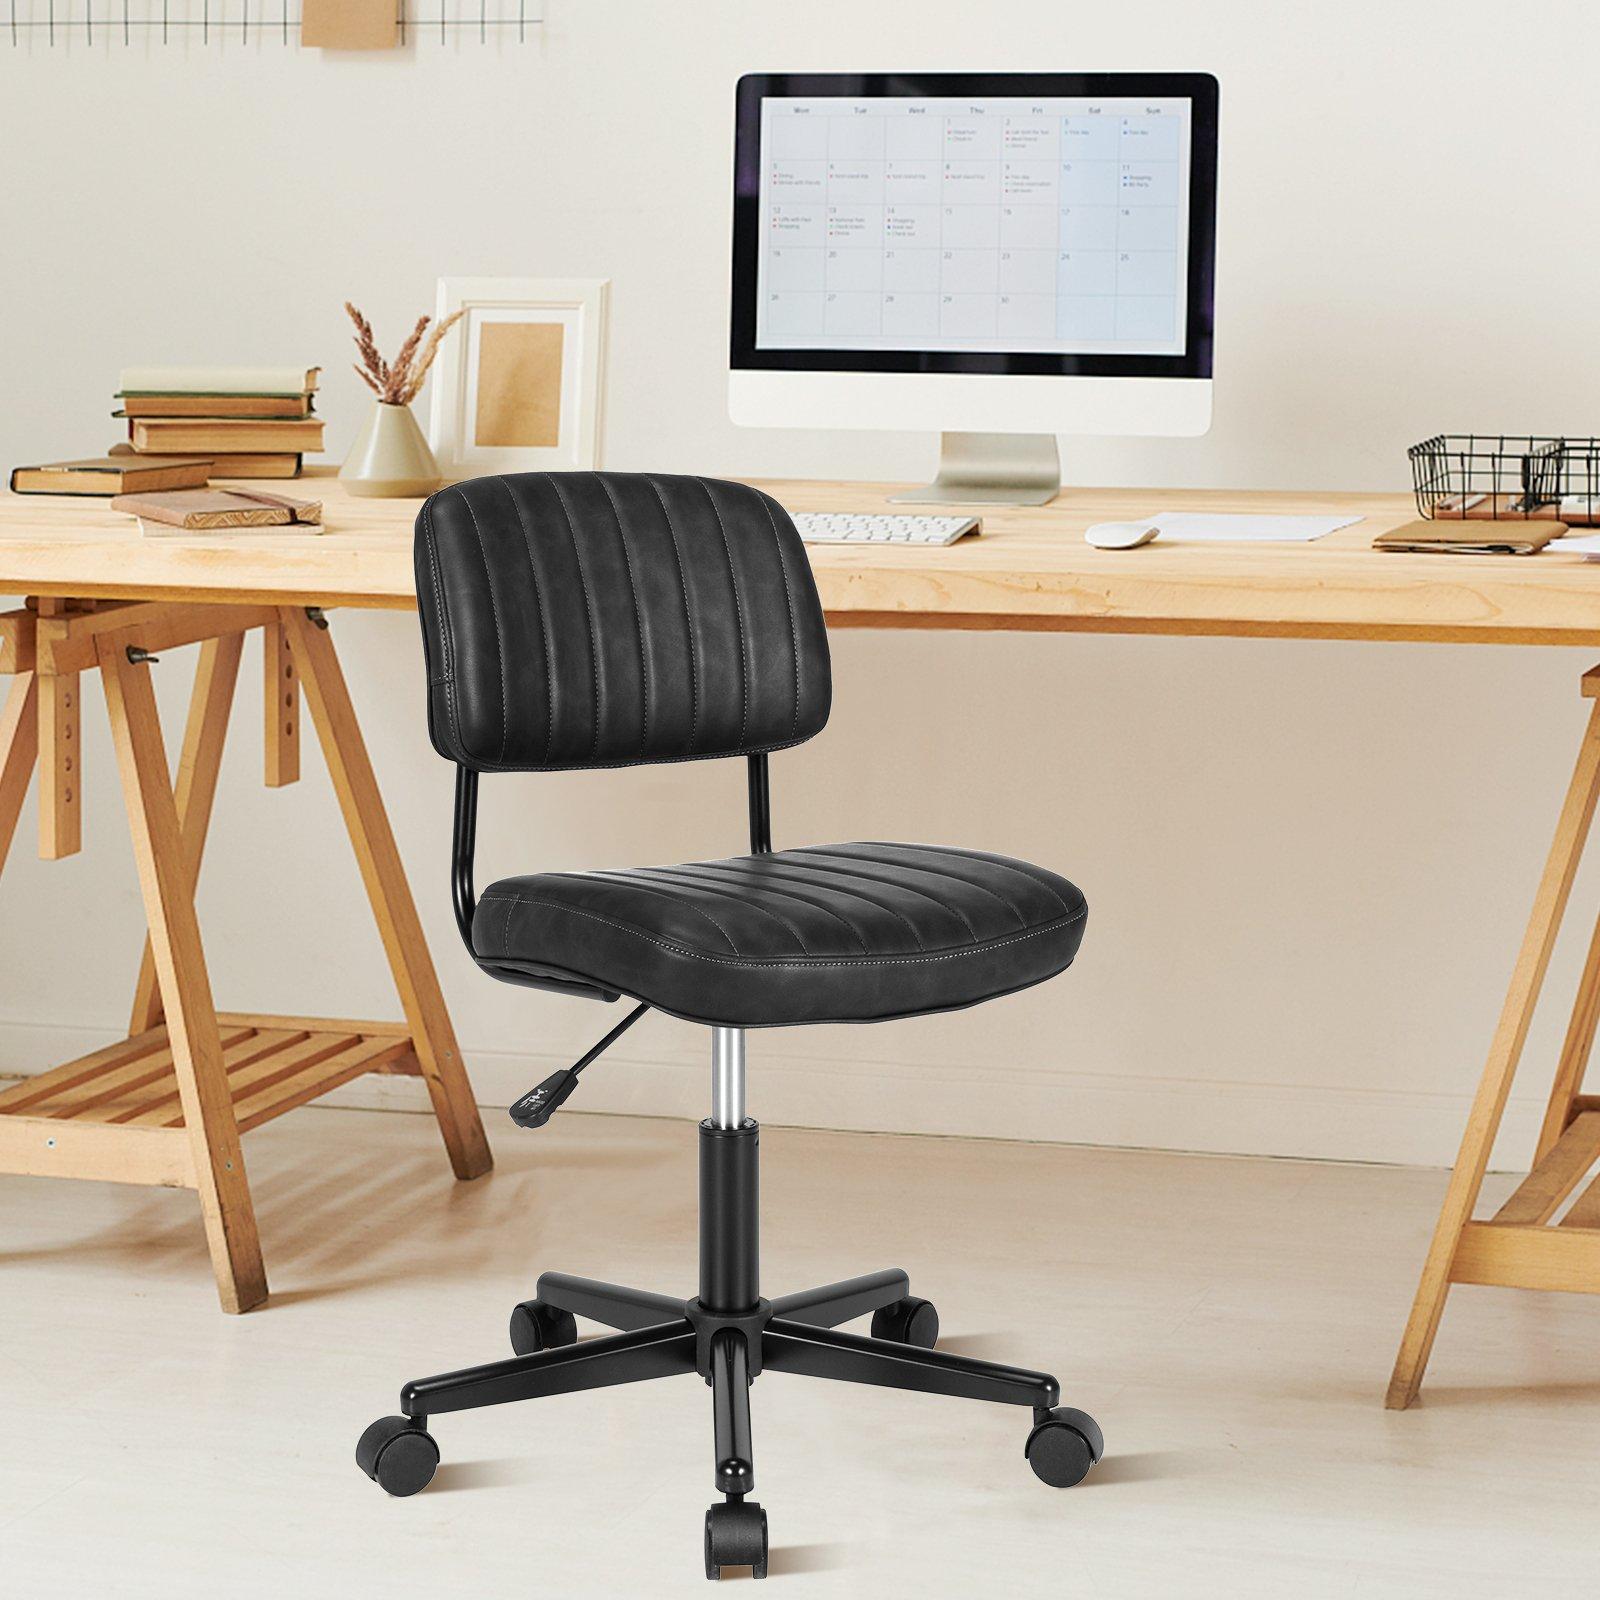 Swivel PU Leather Office Chair Height Adjustable Rolling Computer Desk Chair